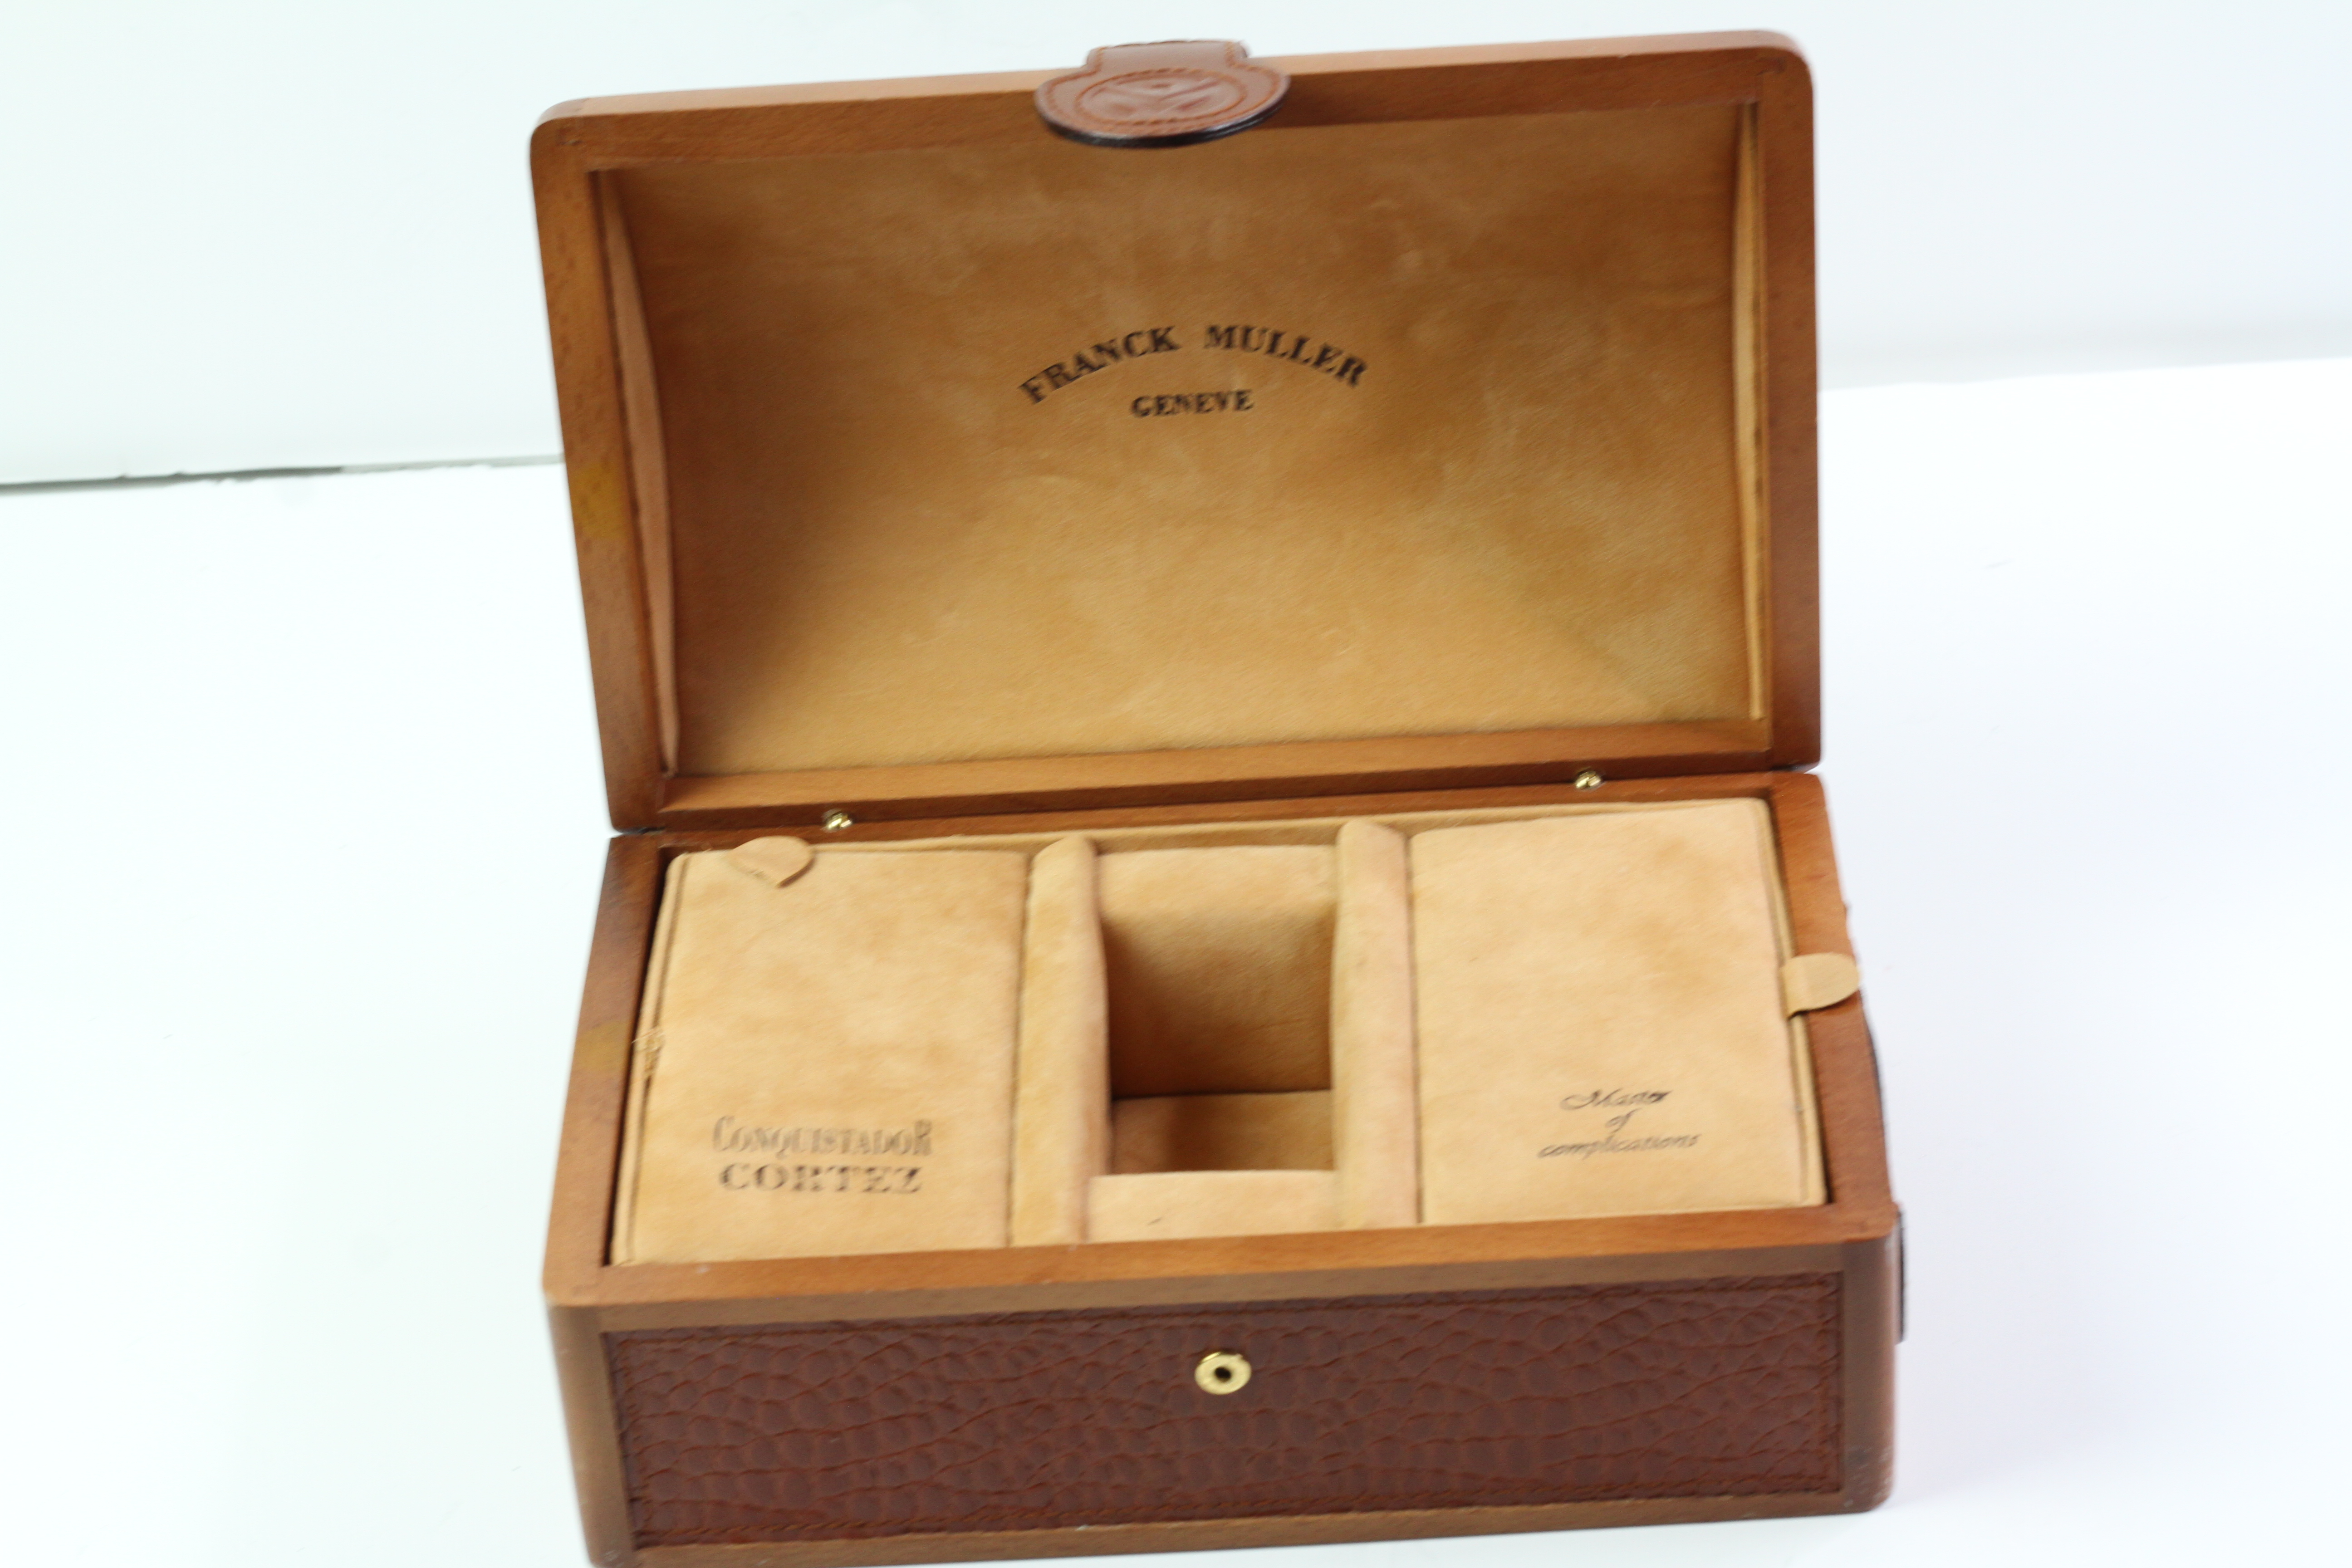 *To Be Sold Without Reserve* Franck Muller Conquistador Leather bound box - Image 2 of 2